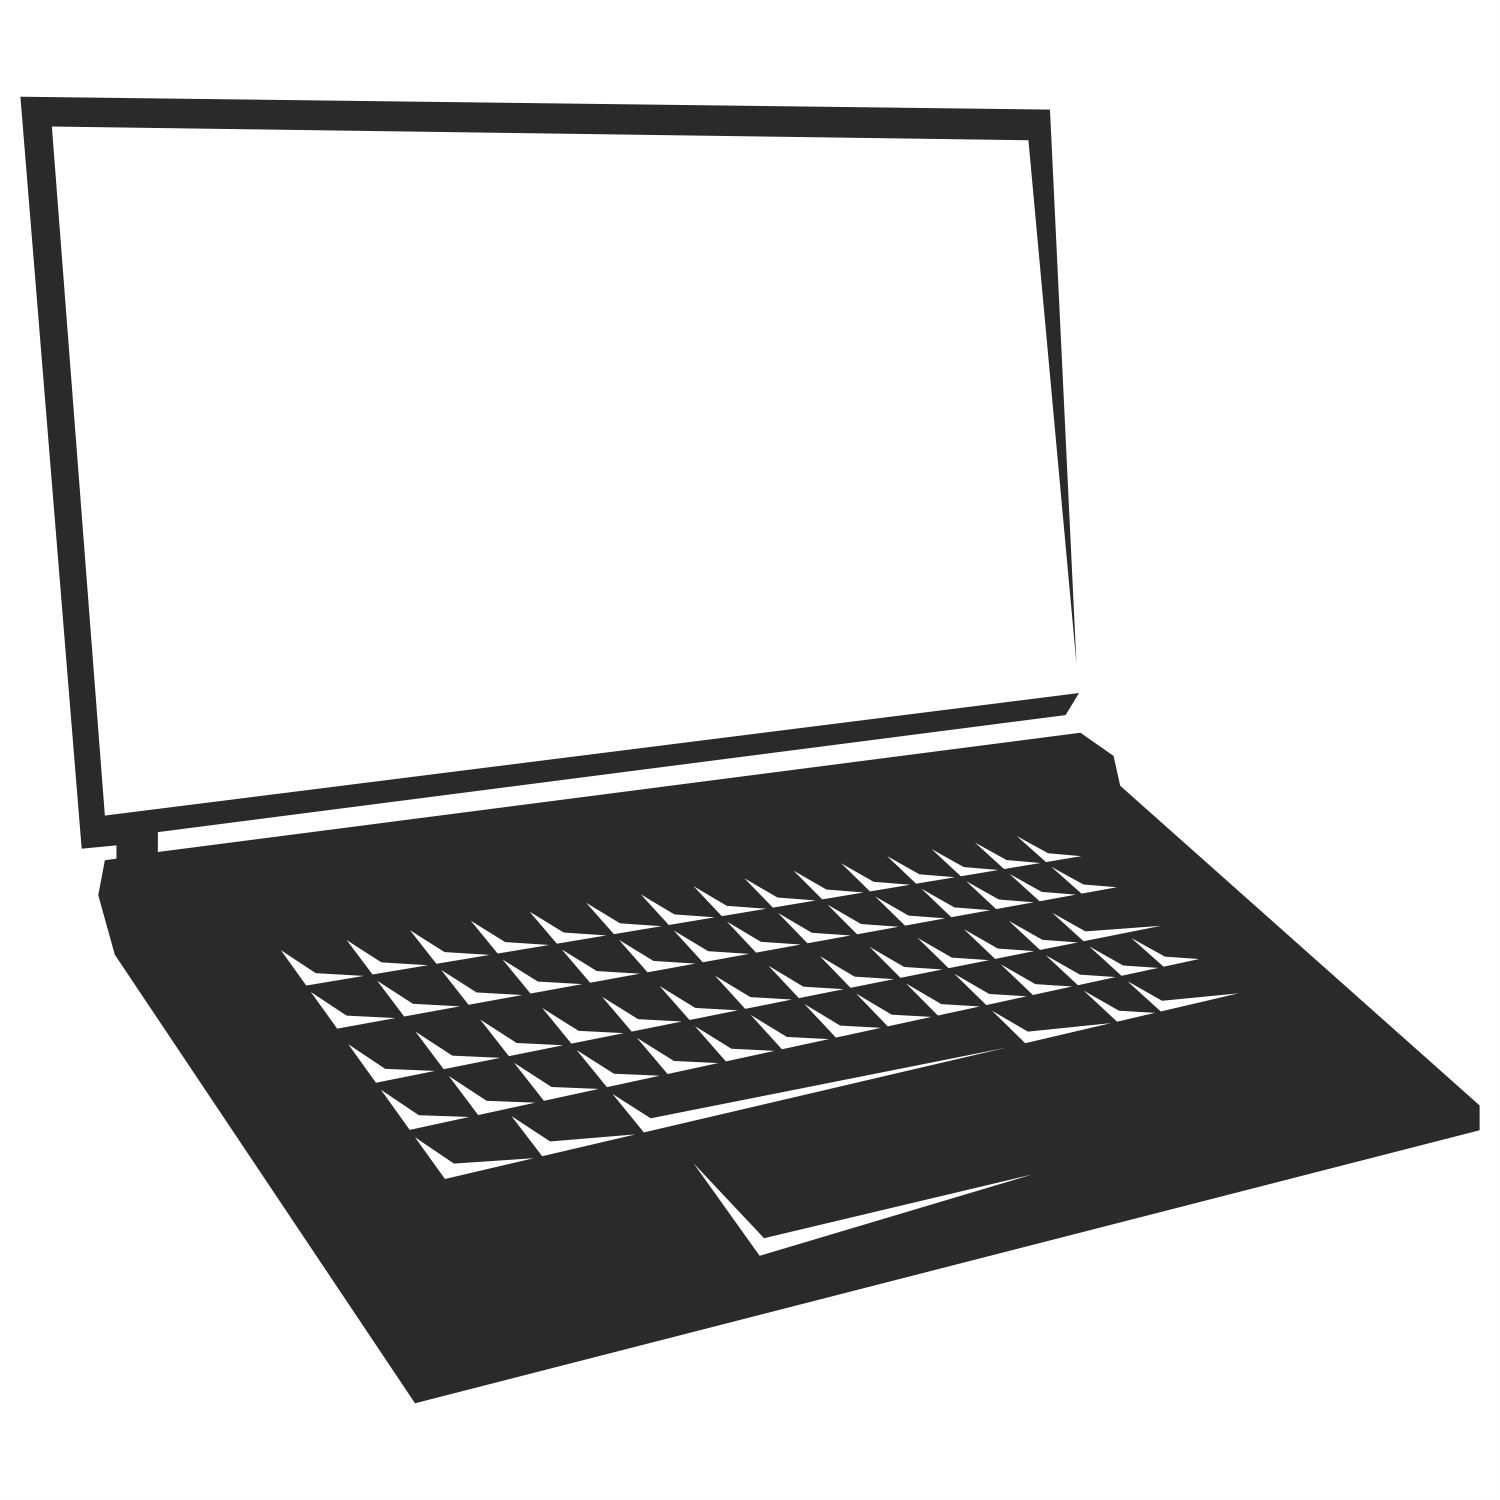 vector-for-free-use-notebook-laptop-vector